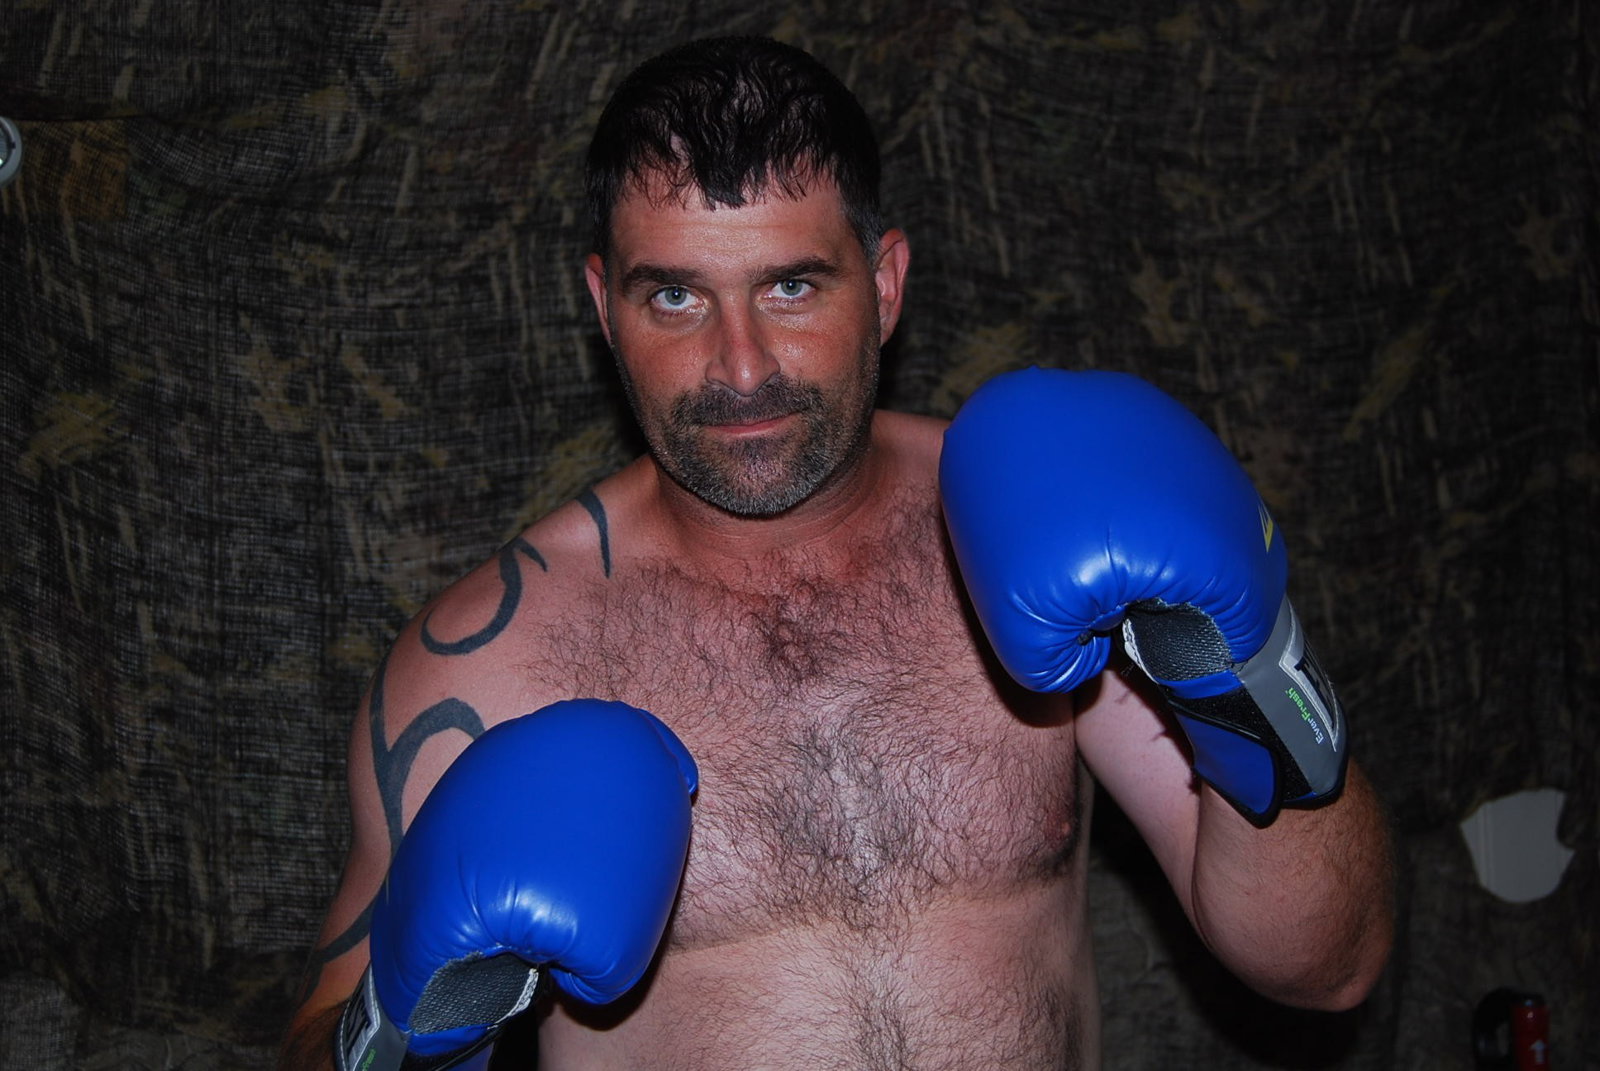 Watch the Photo by Hairy Musclebears with the username @hairymusclebears, posted on September 24, 2019 and the text says 'Boxing Goatee Musclebear Man from USAFUR.com galleries #GayDaddy #Instagay #GayChub #GayCub #hairybelly #BearPhotoADay #gaychubby #bearweek365 #bearsofinstagram #moobs #humanpuppy #humanpupplay #gaypupplay #gayexercisepup #gaymuscle #puppypride #gaykink..'